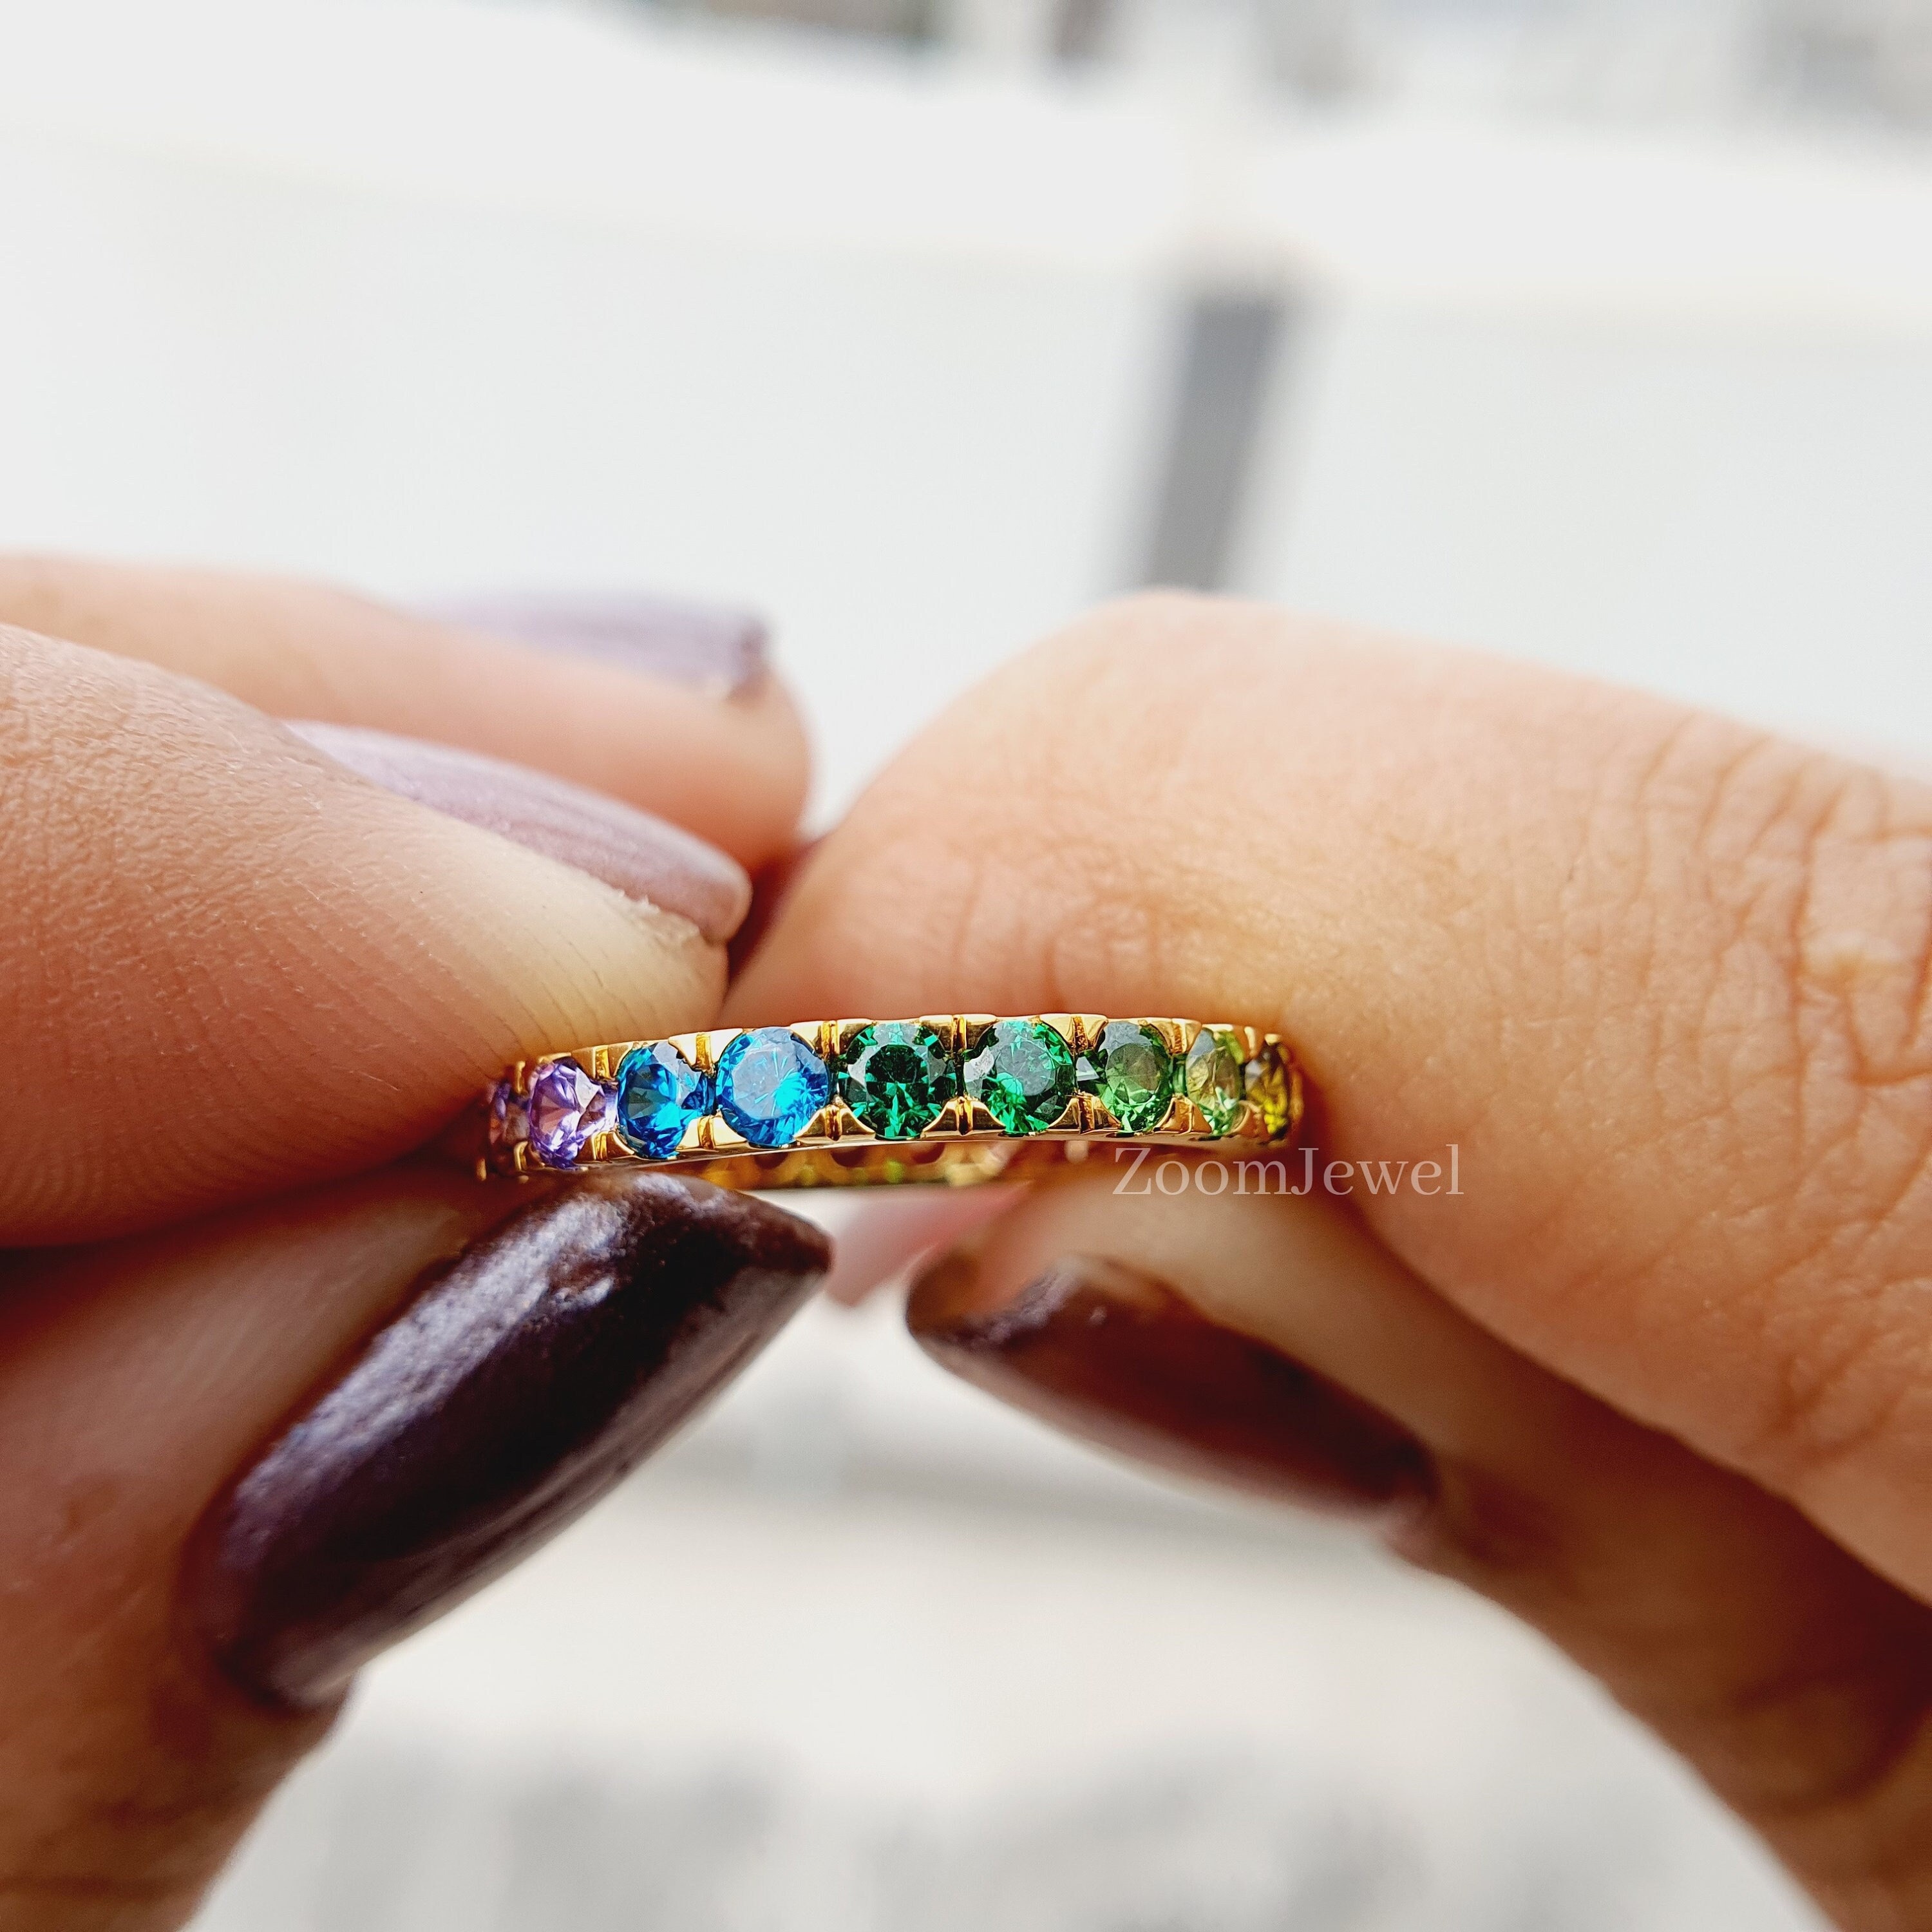 Rainbow Ring 18ct Gold Sterling Silver Jewellery Rings Multi-Stone Rings Colourful Stone Ring Y2K Rainbow Jewellery Statement Bold Ring For Women Christmas Gift For Her 